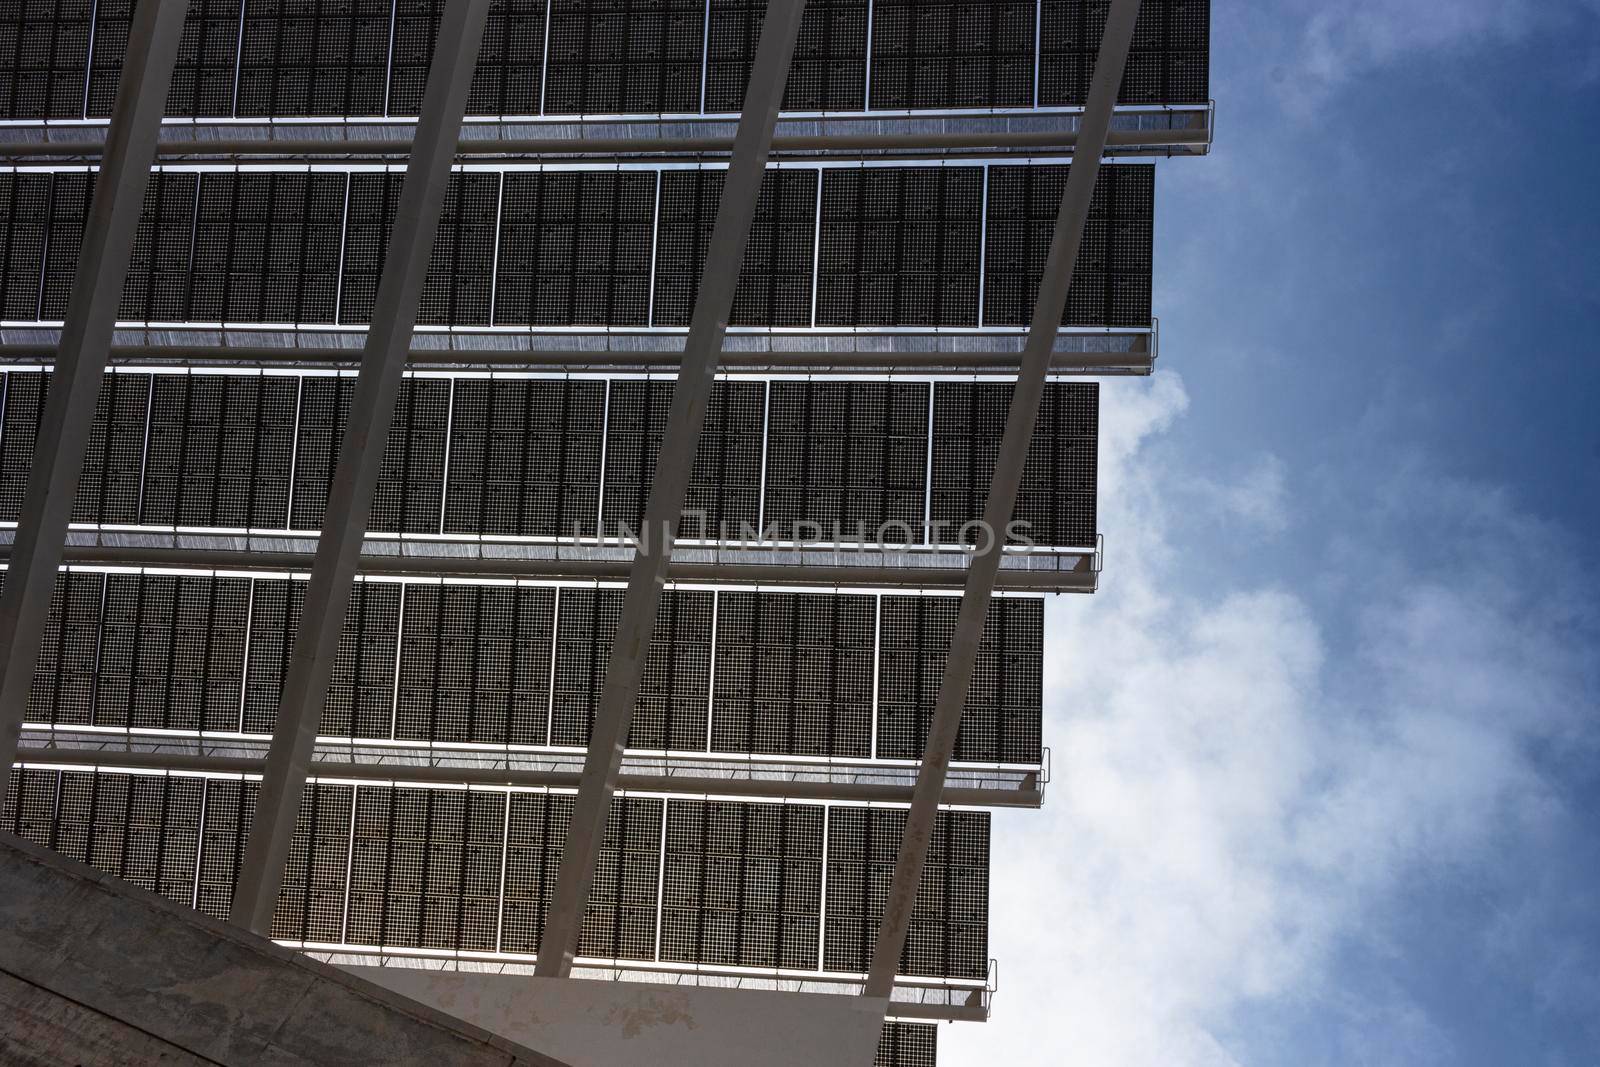 Solar panels located in the port of Barcelona by loopneo